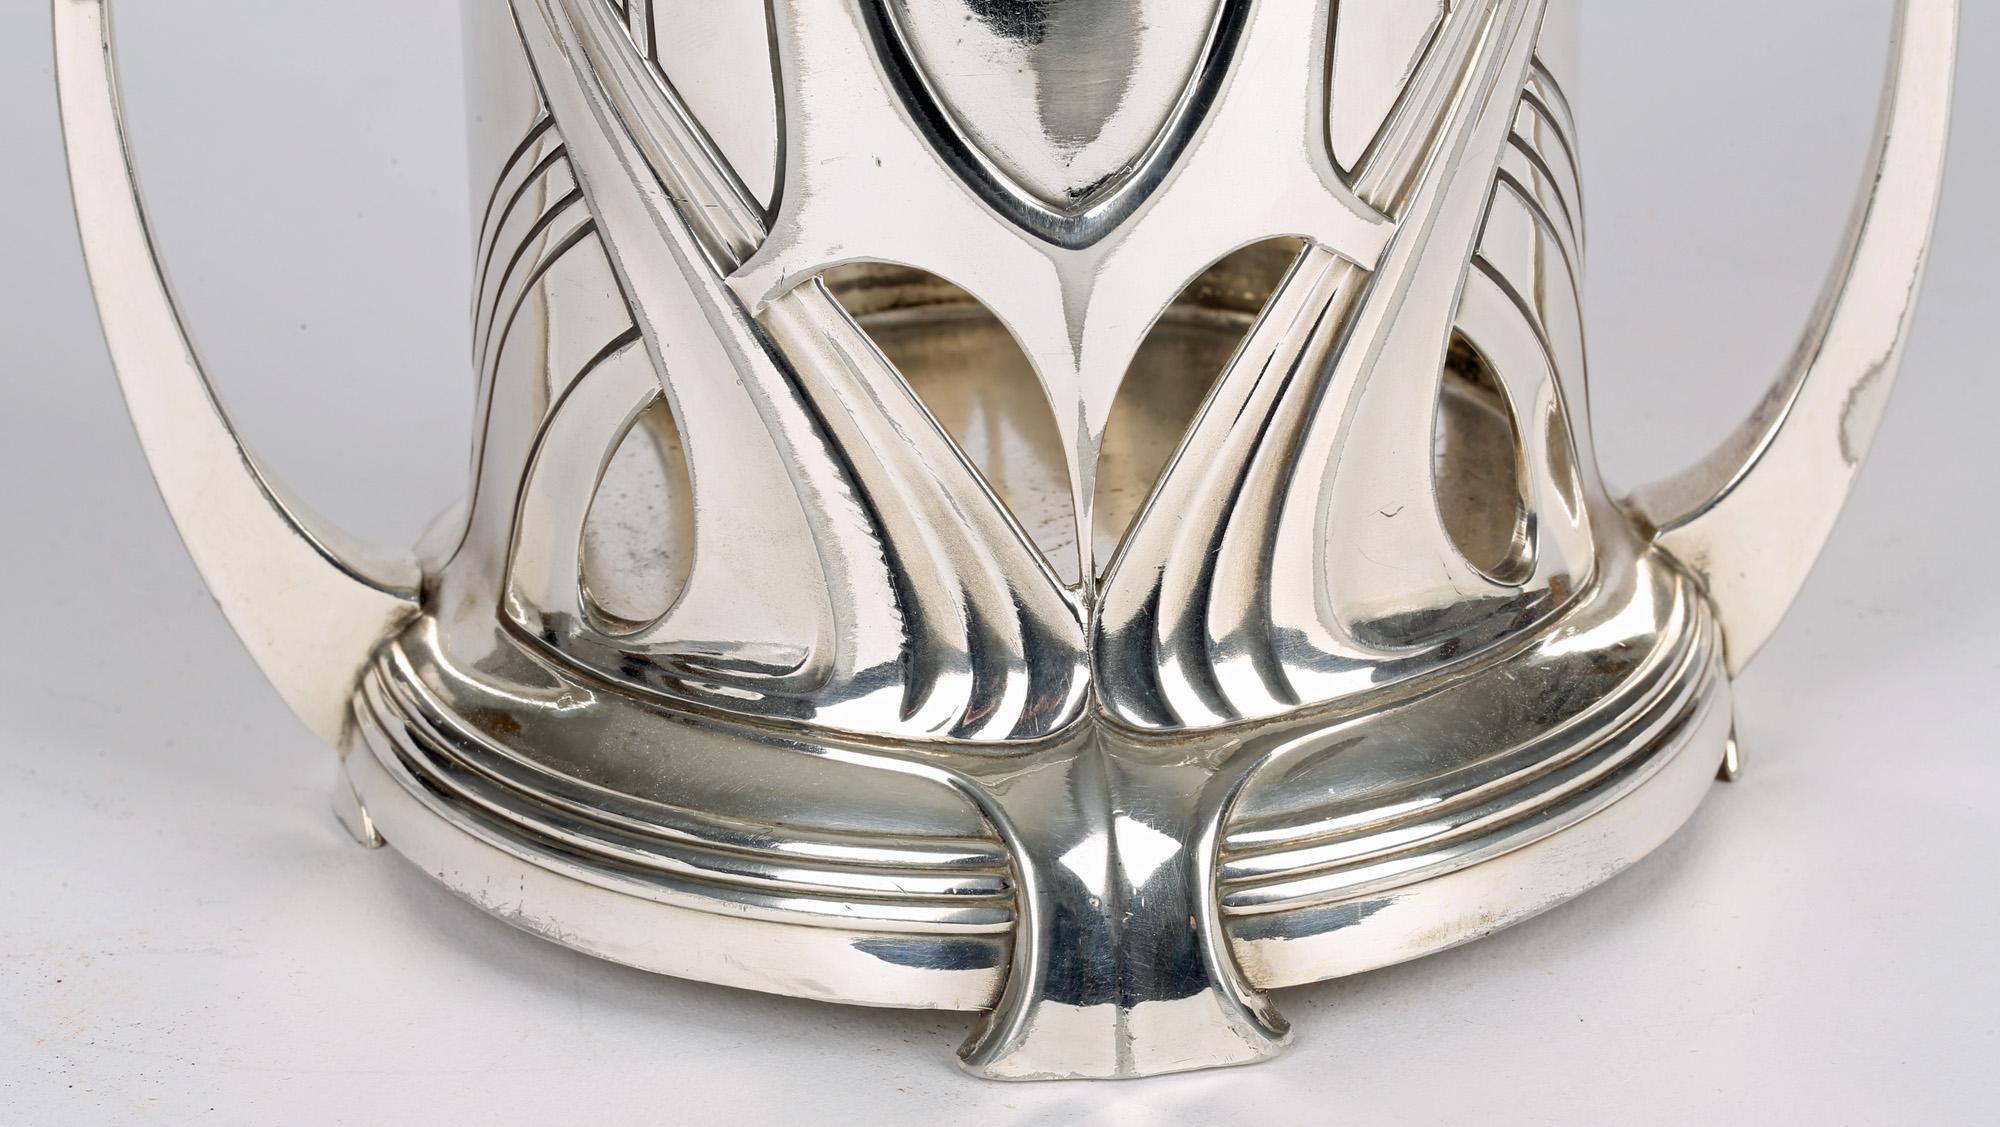 A stunning German jugendstil silver plated twin handled soda syphon or bottle holder made by WMF (Württembergische Metallwarenfabrik) and dating from circa 1906. The holder is of rounded cylindrical shape standing raised on four feet on a wide